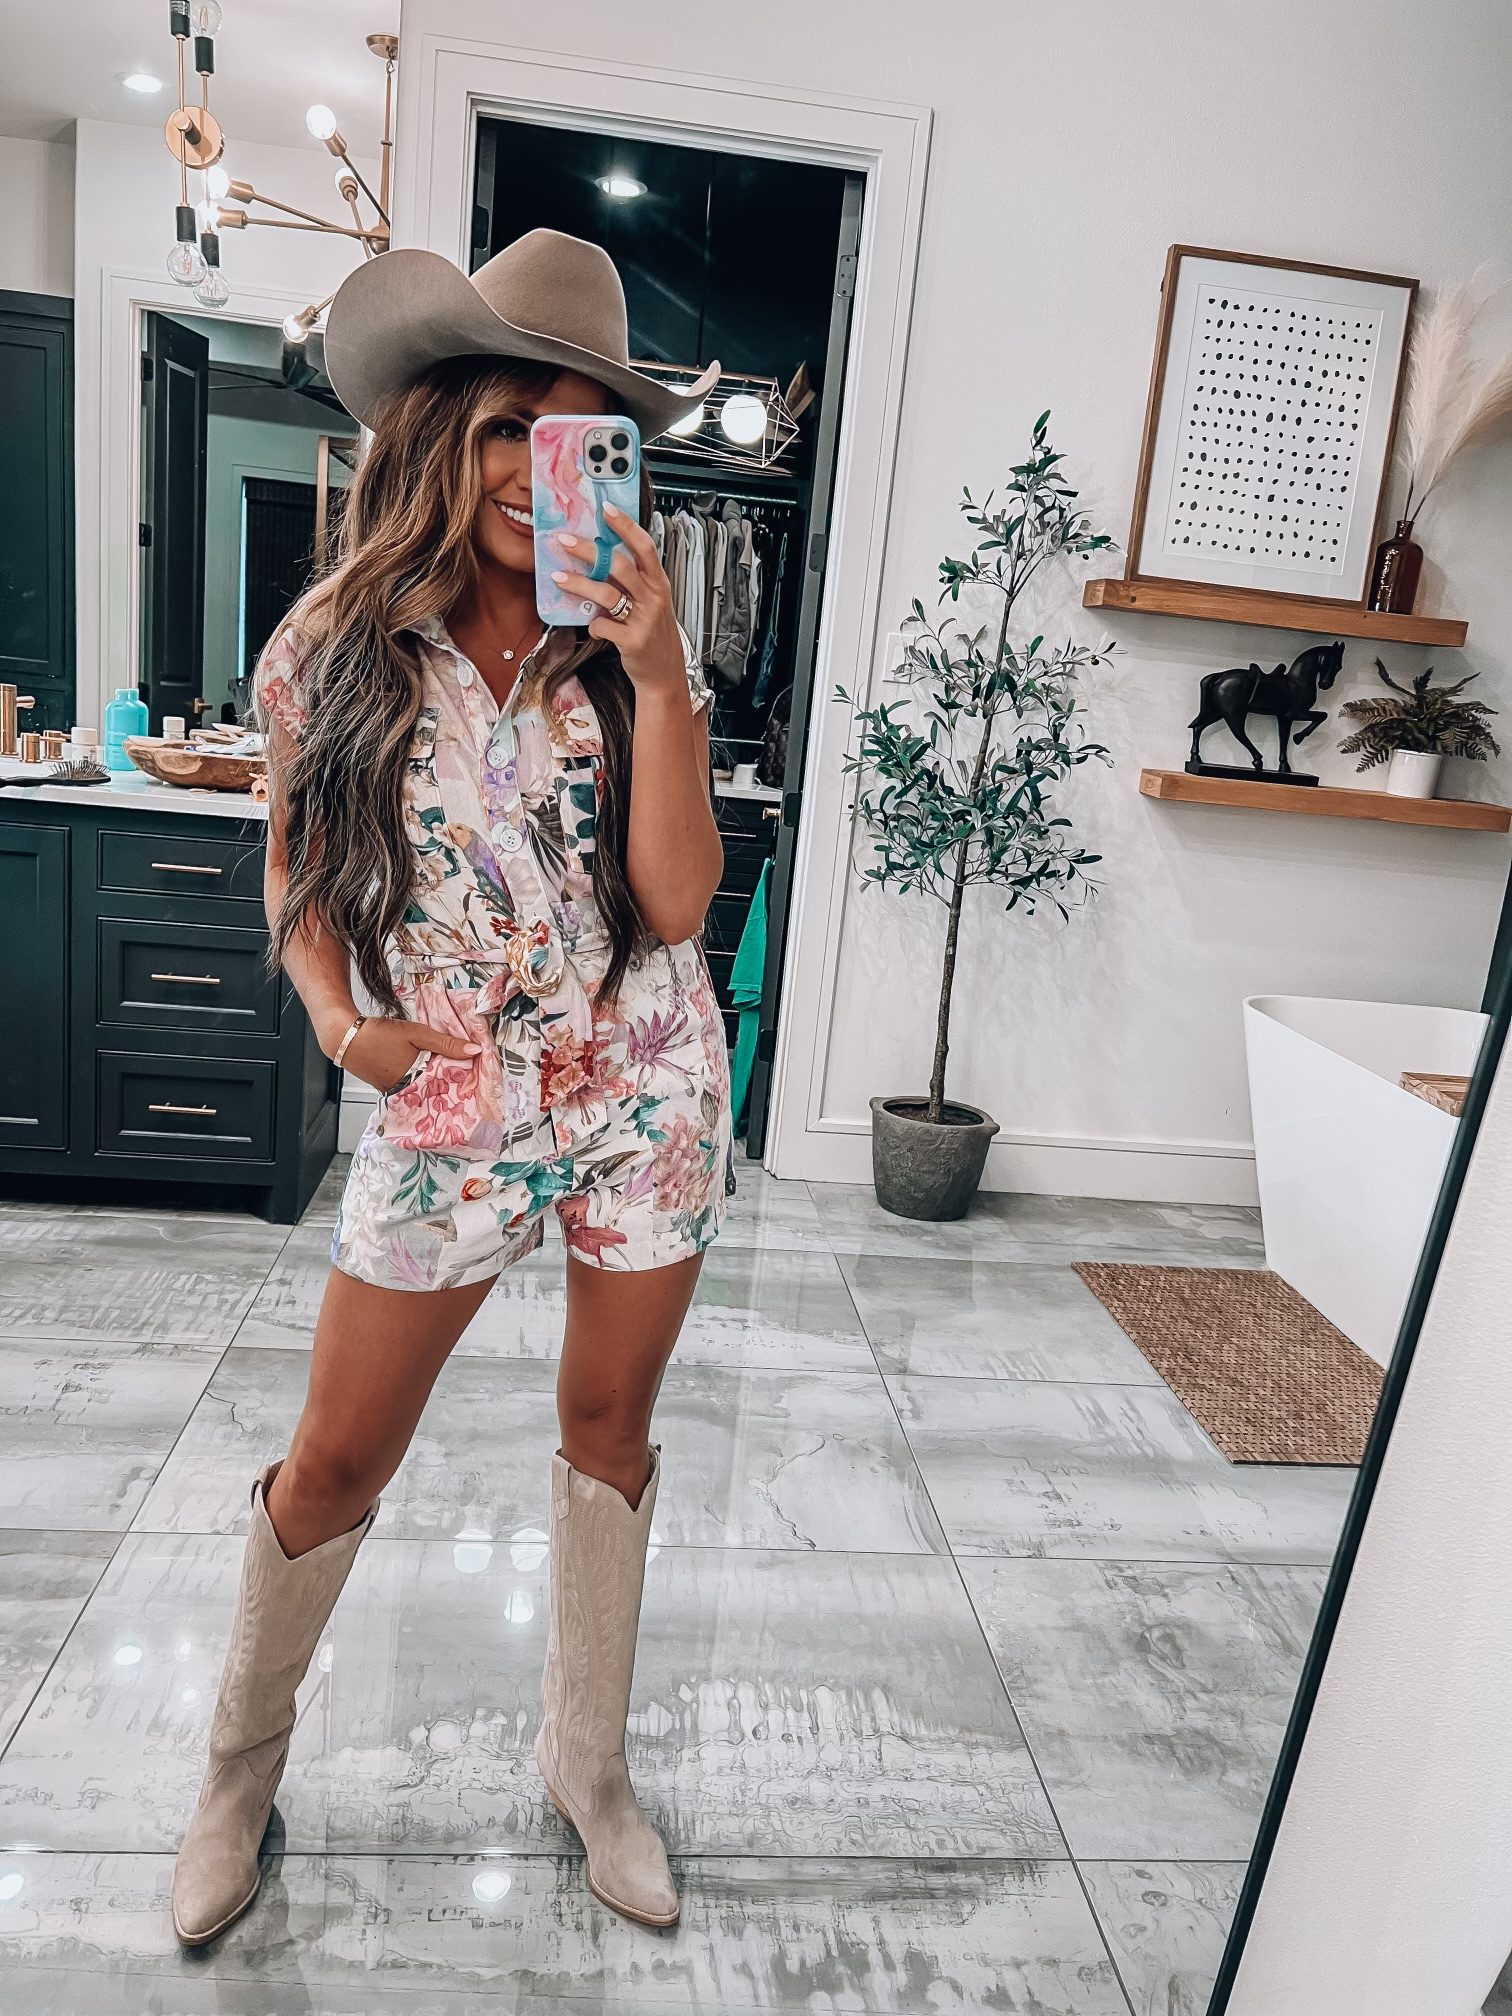 Concert Outfit Ideas Knee High Boots